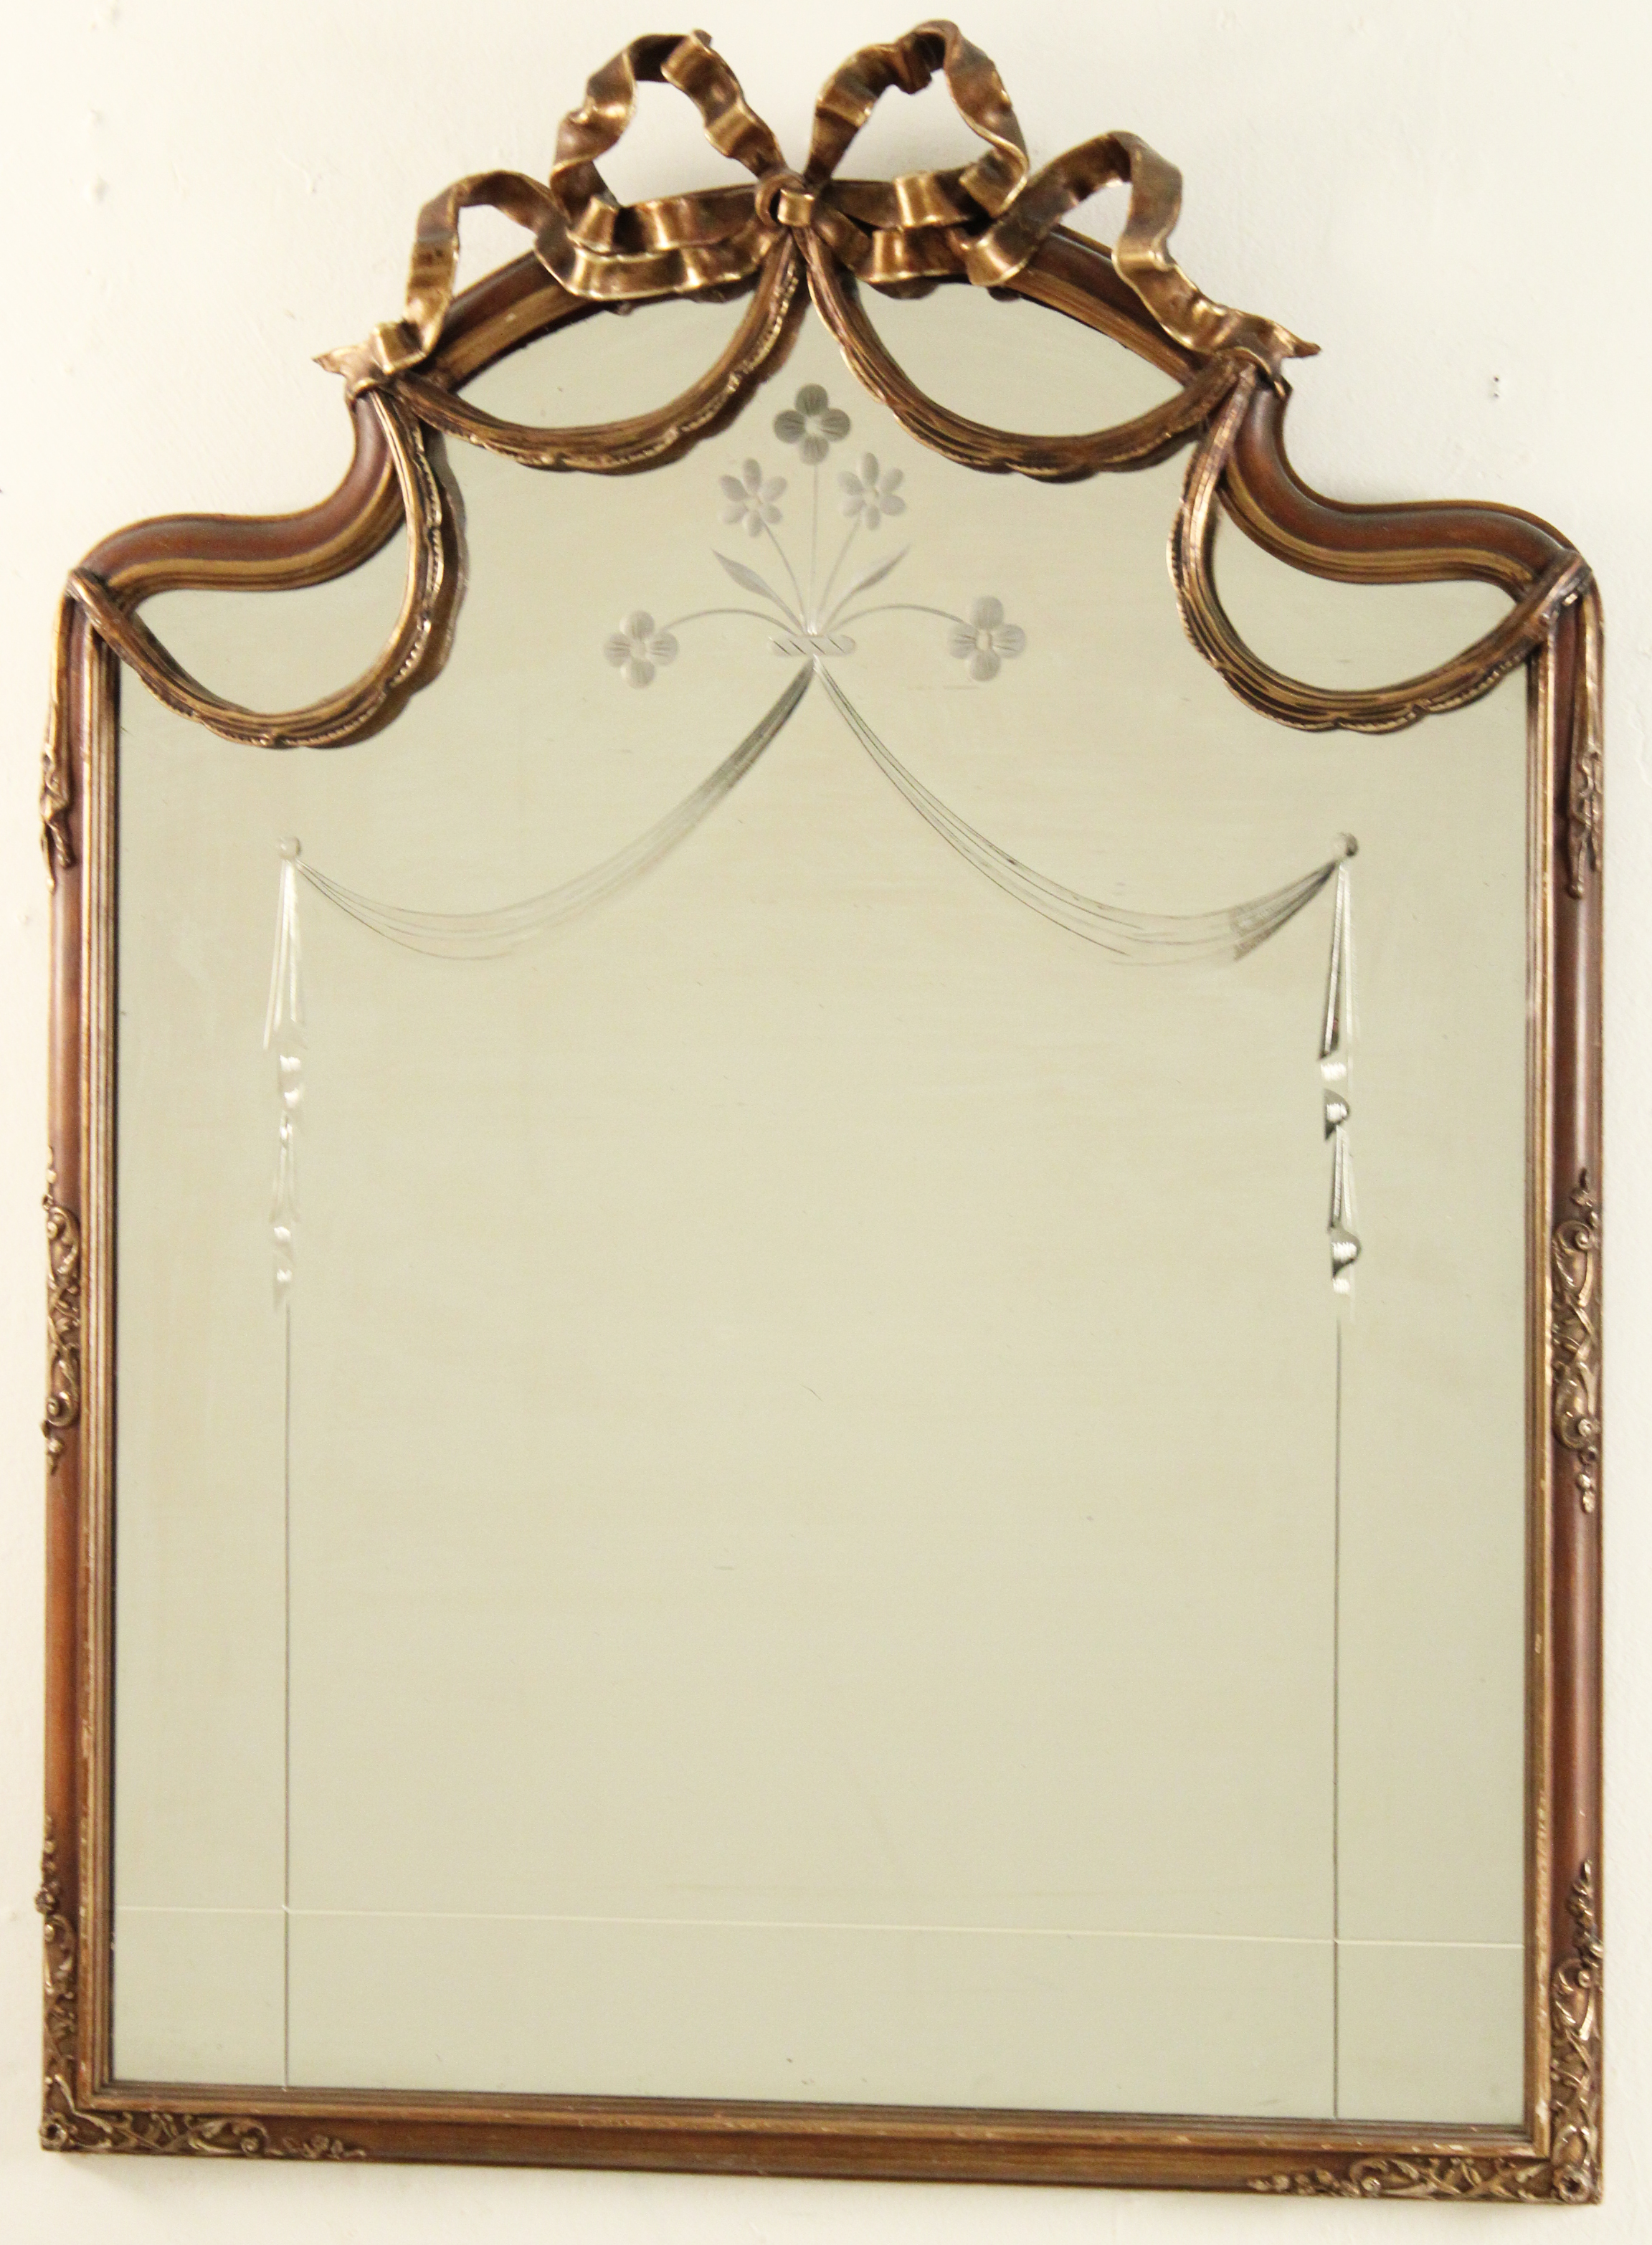 DECORATIVE CARVED GILTWOOD MIRROR